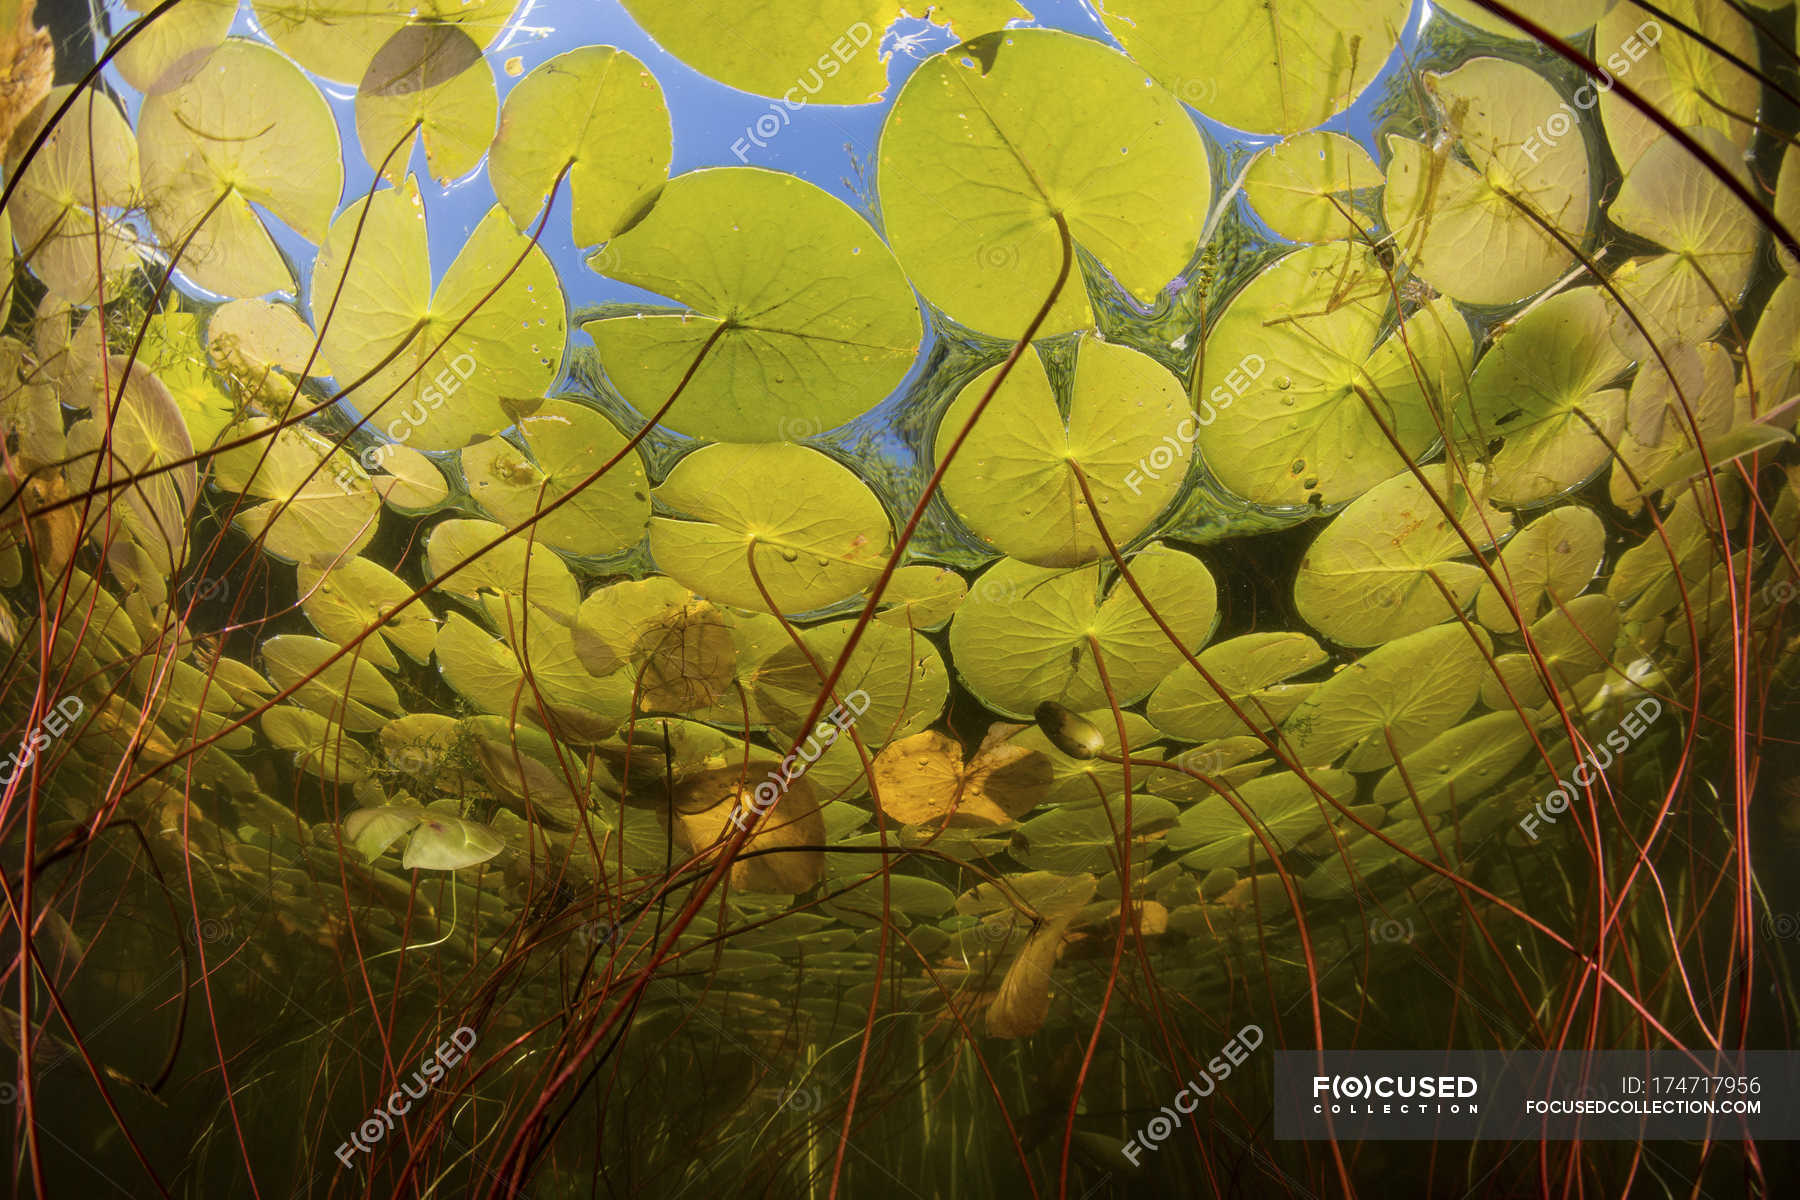 colorful-lily-pads-growing-in-freshwater-lake-growth-stems-stock